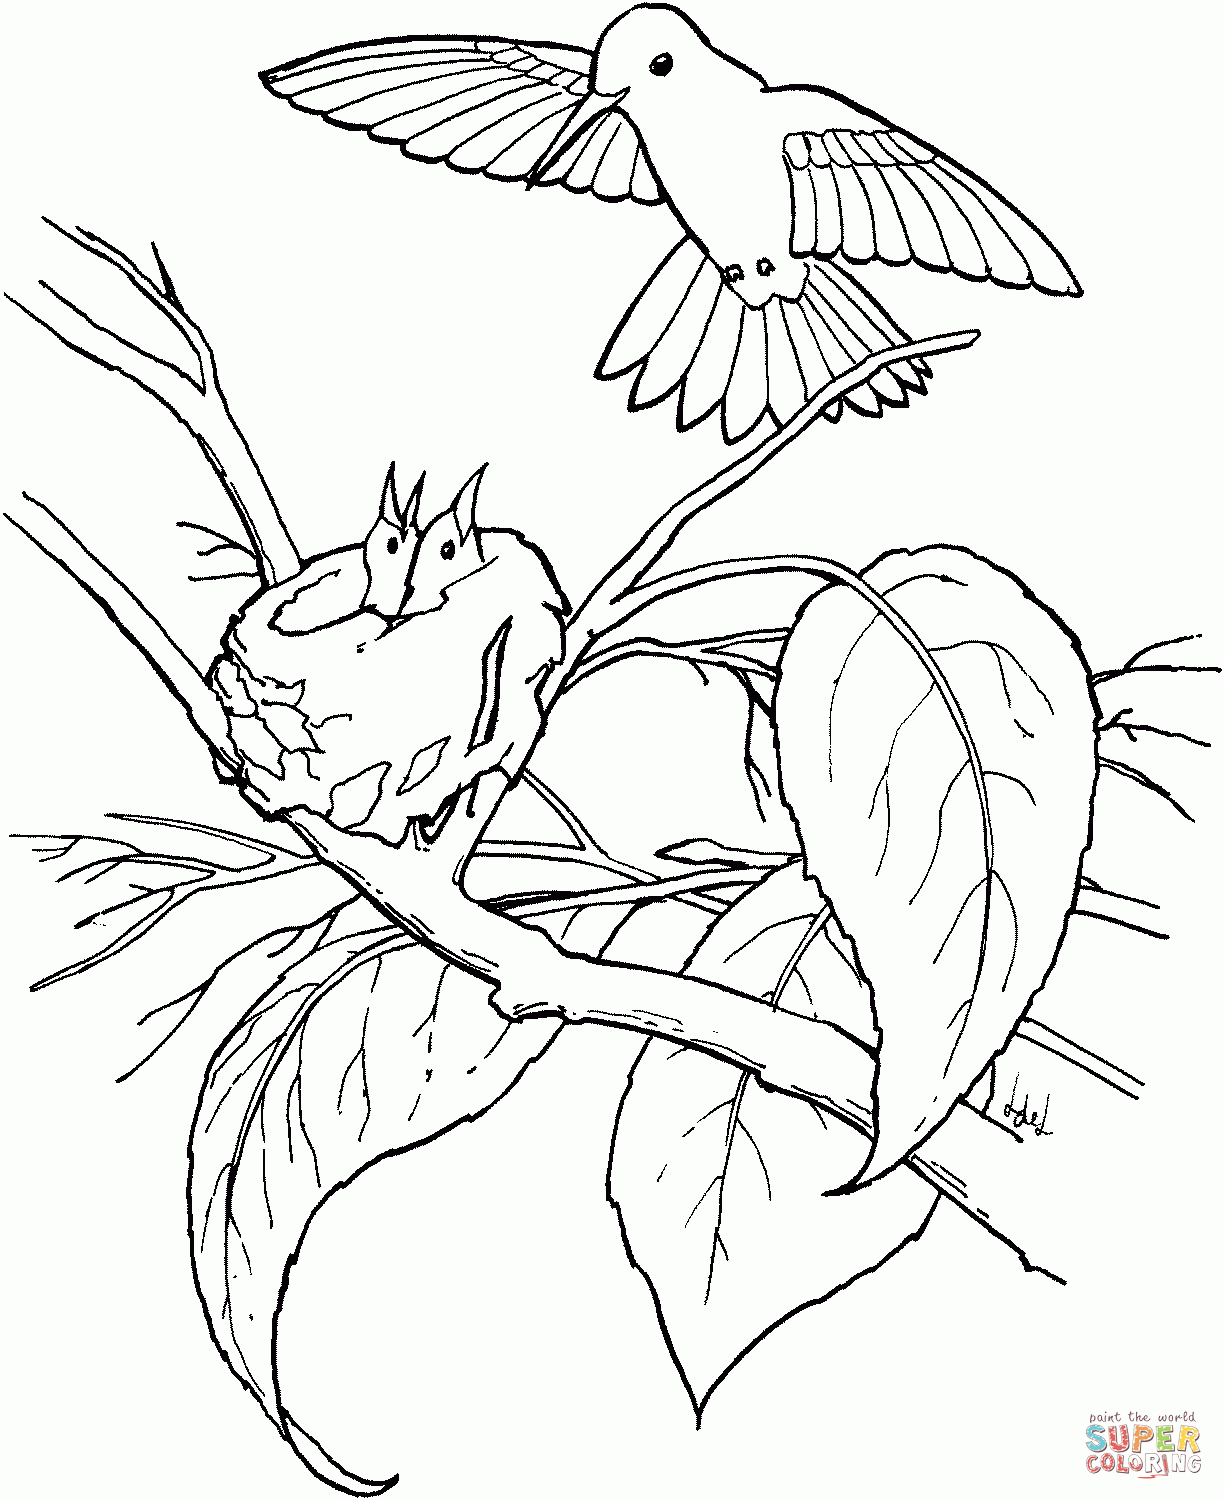 Hummingbirds Coloring Pages | Free Coloring Pages - Free Printable Pictures Of Hummingbirds